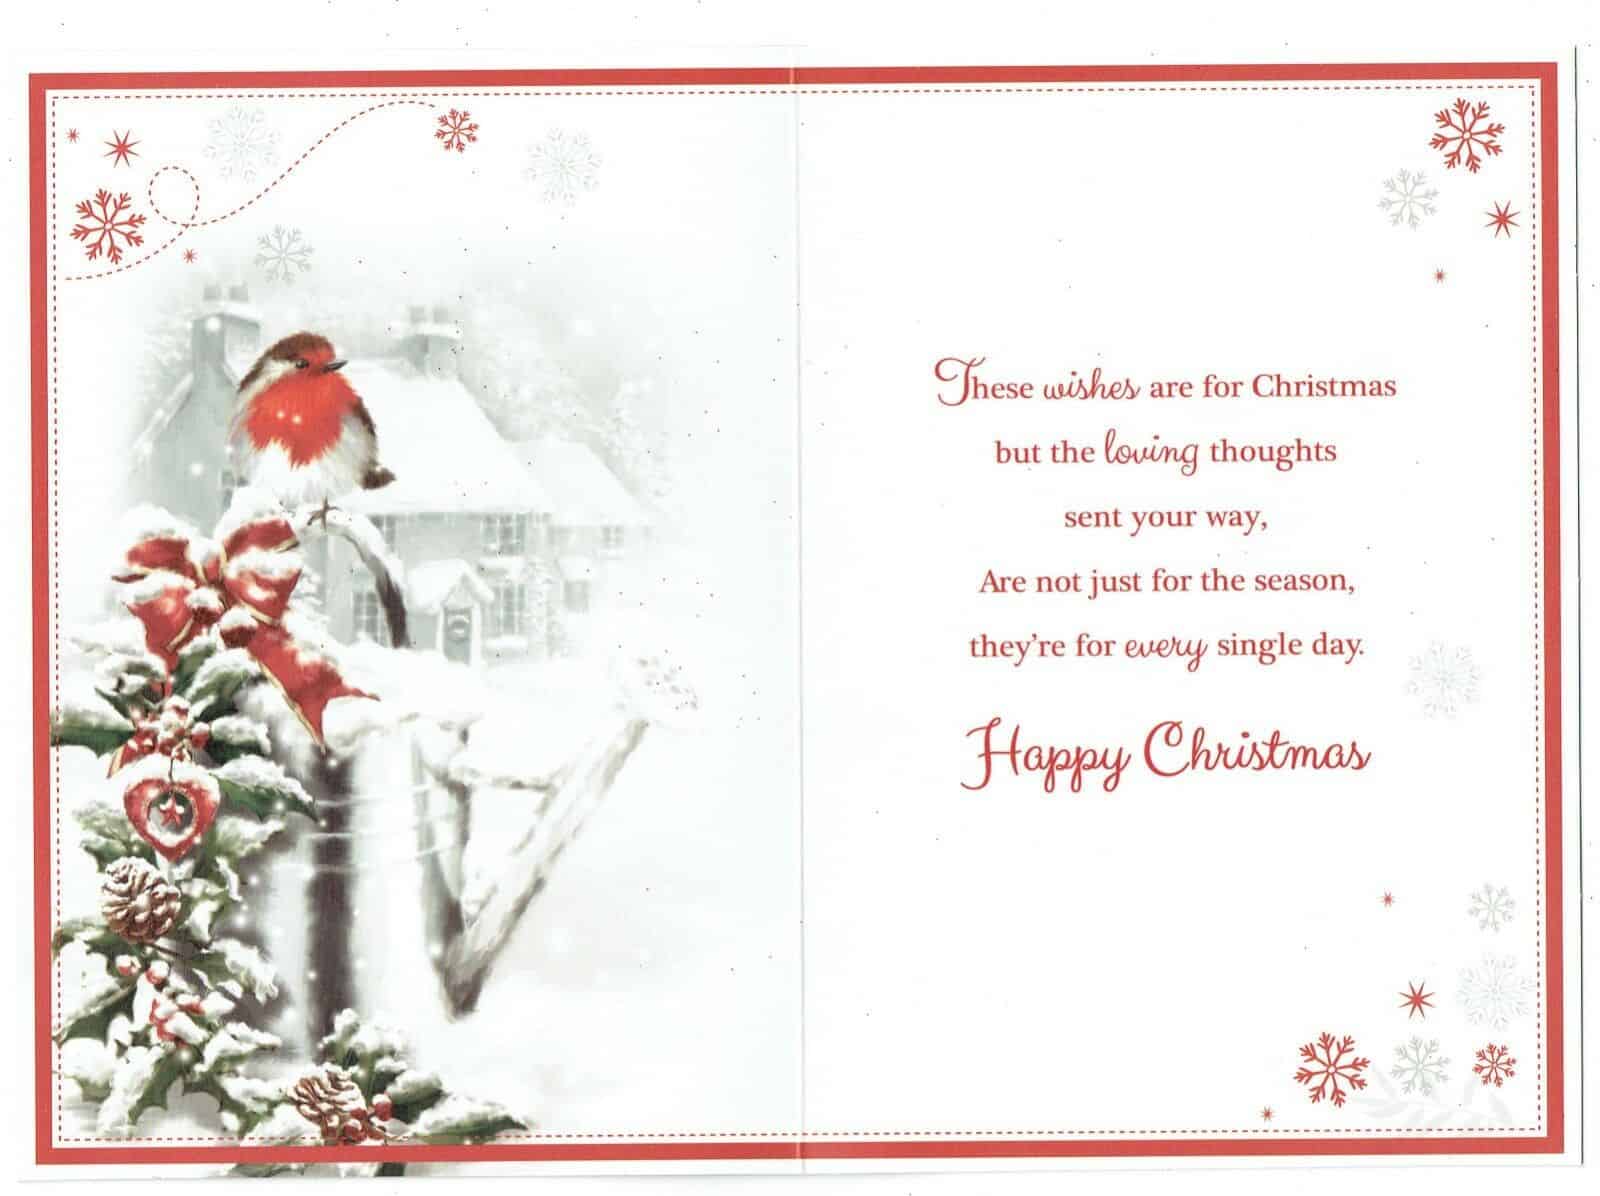 Daughter And Family Christmas Card With Robin And Sentiment Verse